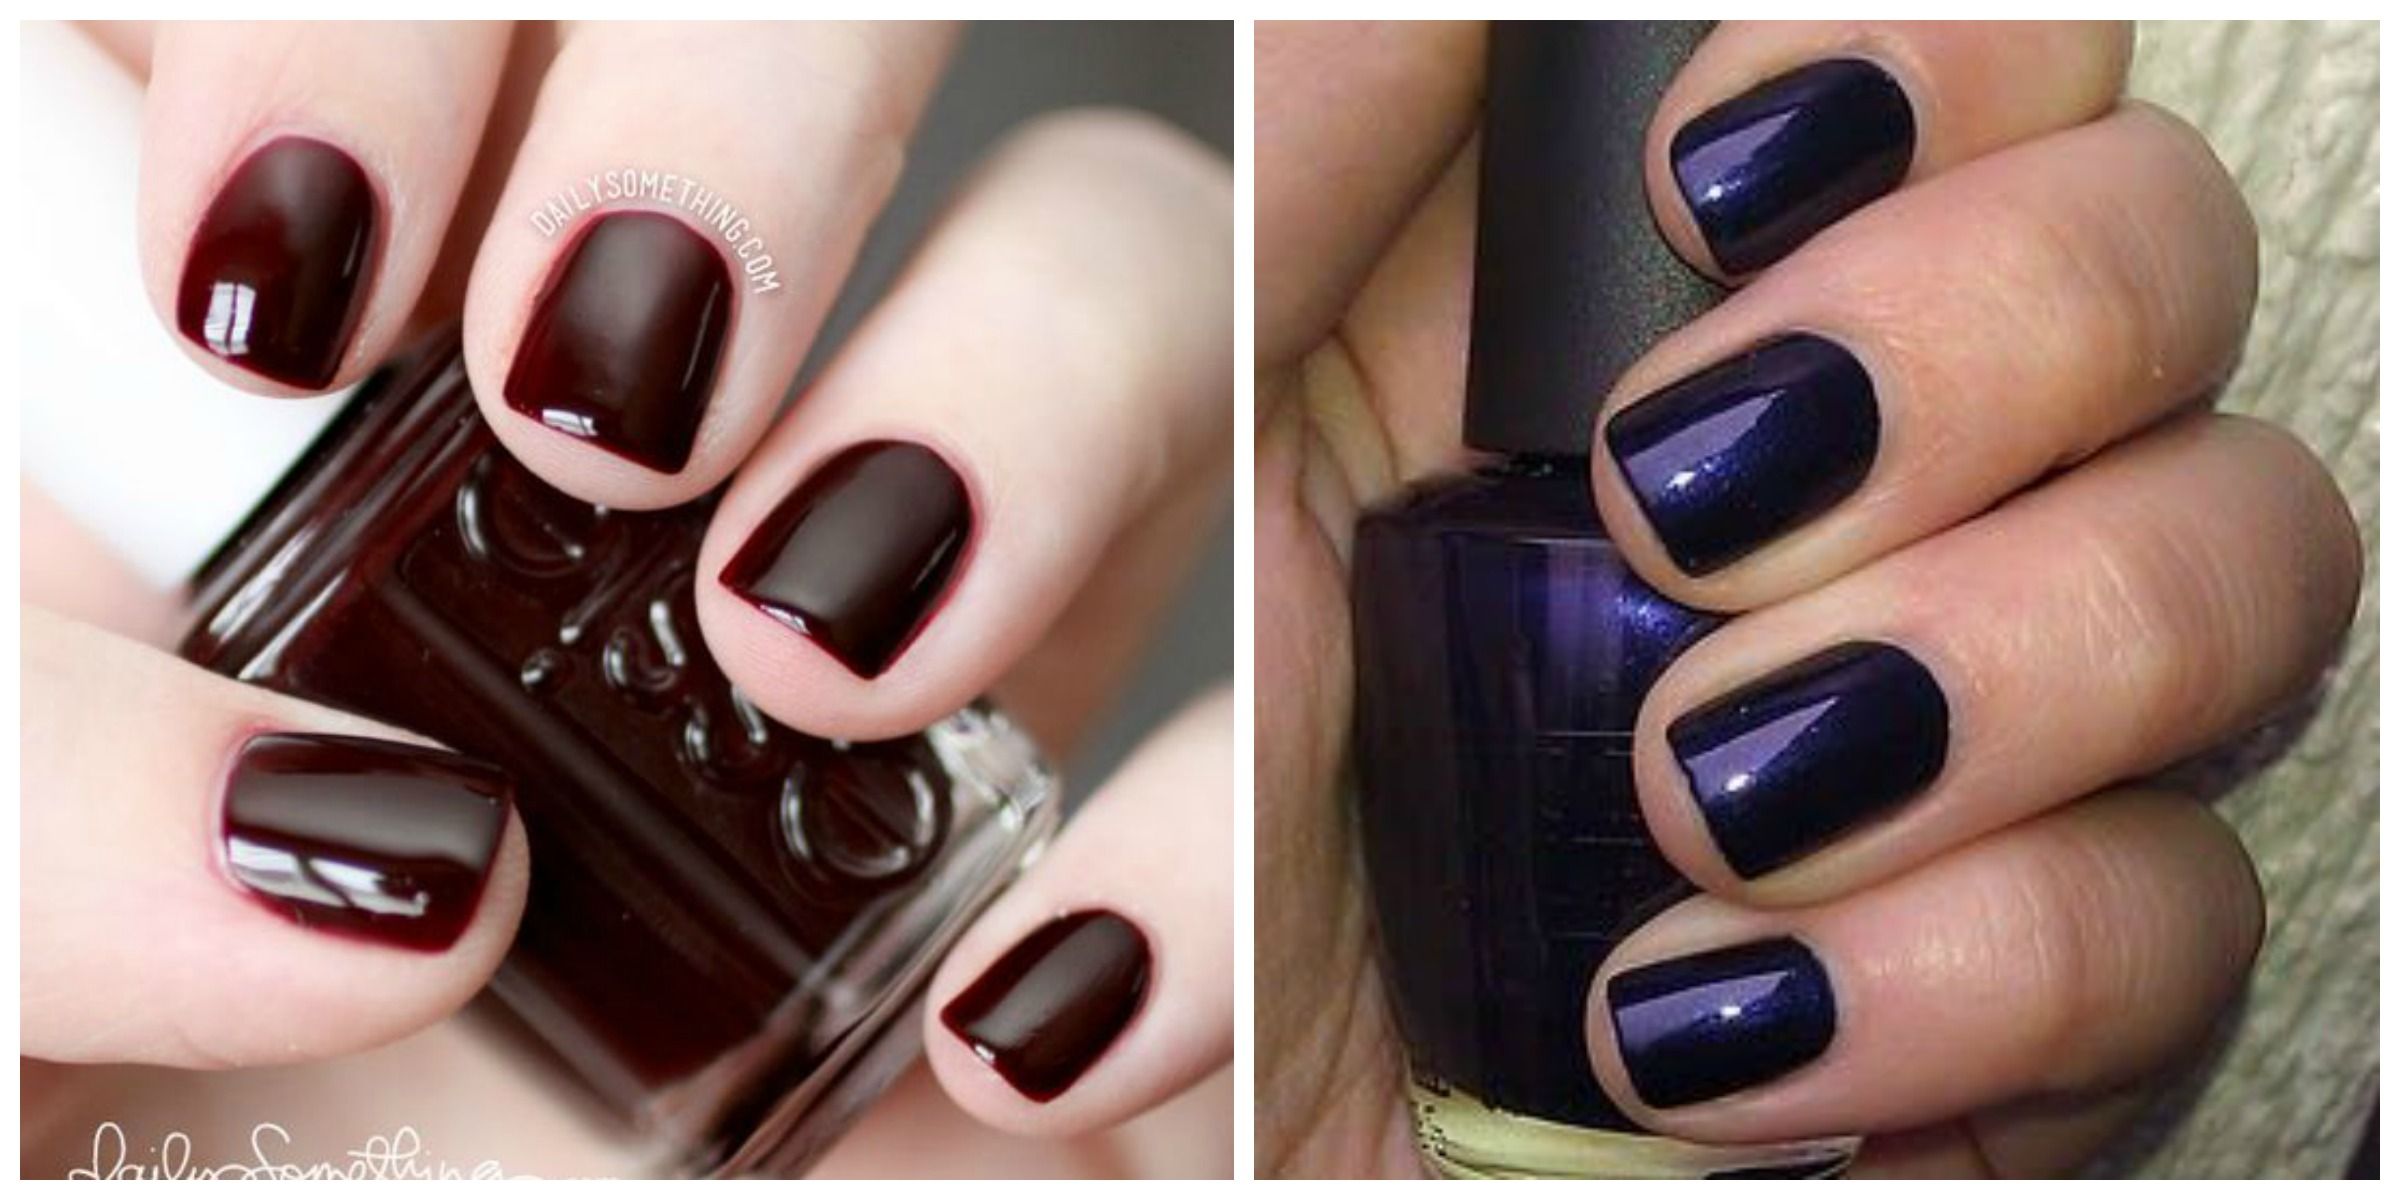 3. "The Hottest Nail Polish Colors of the Season" - wide 4